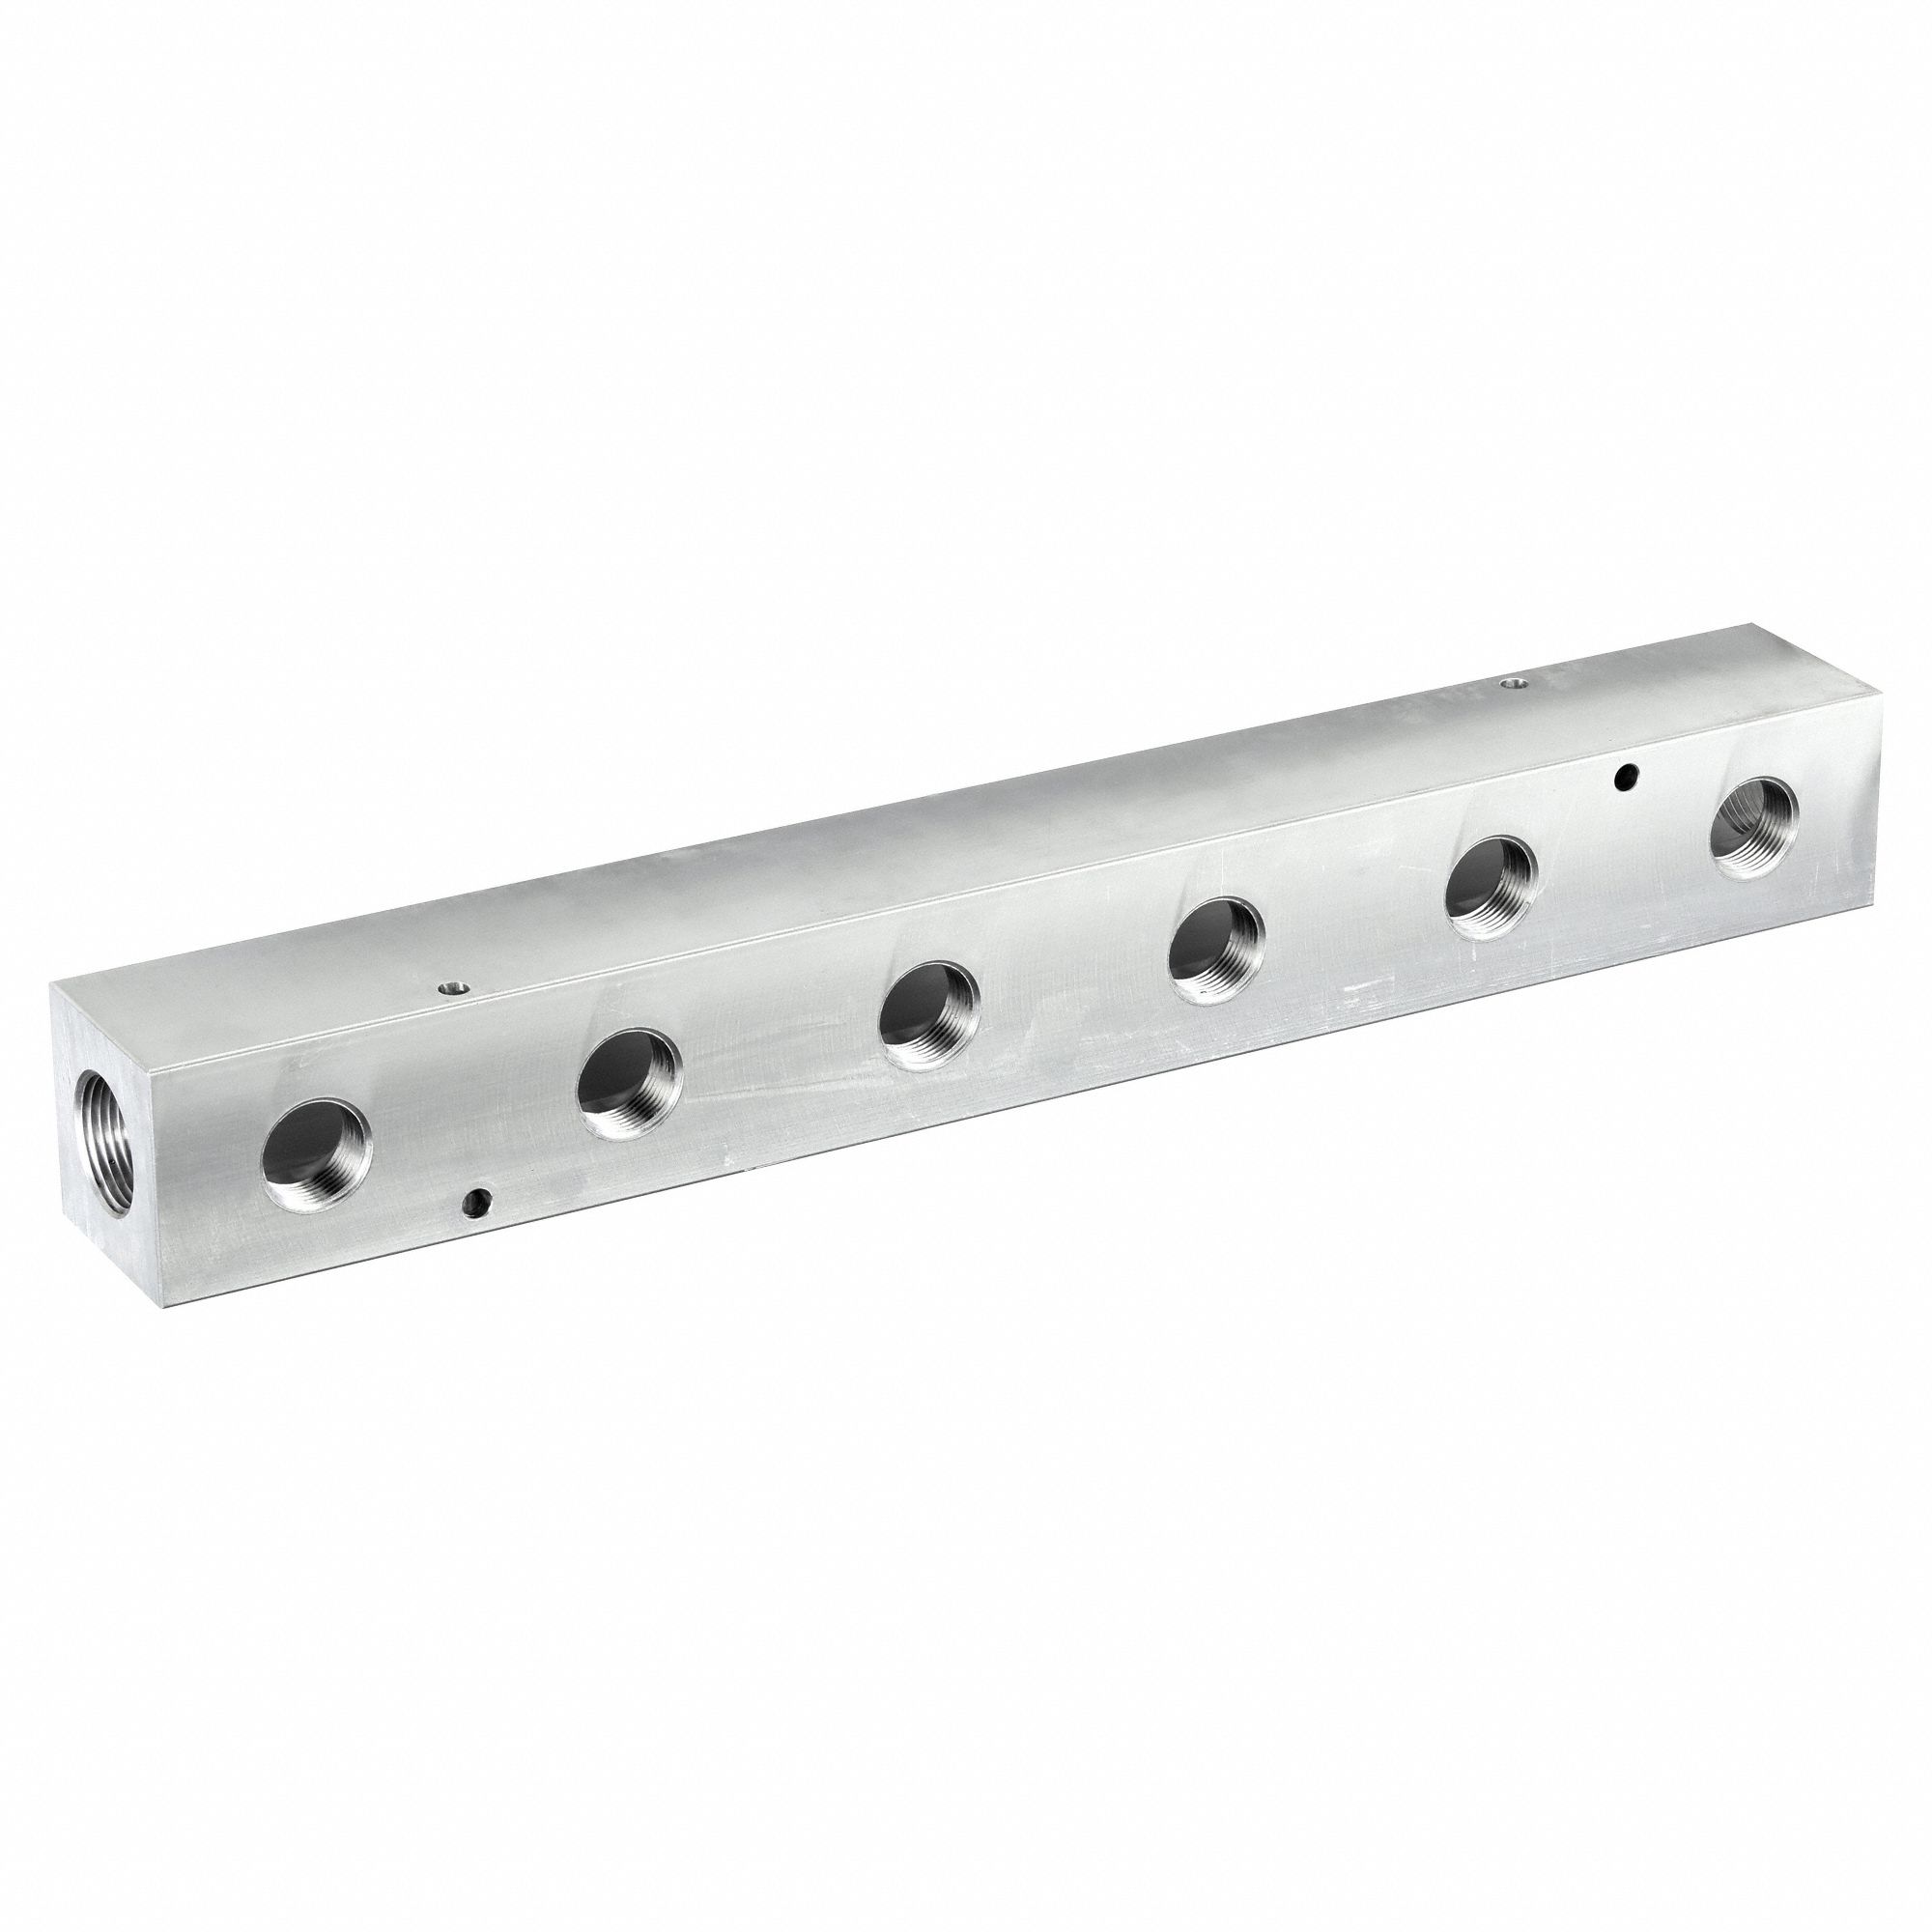 MANIFOLD,6 OUTLETS,OUTLET SIZE 3/4